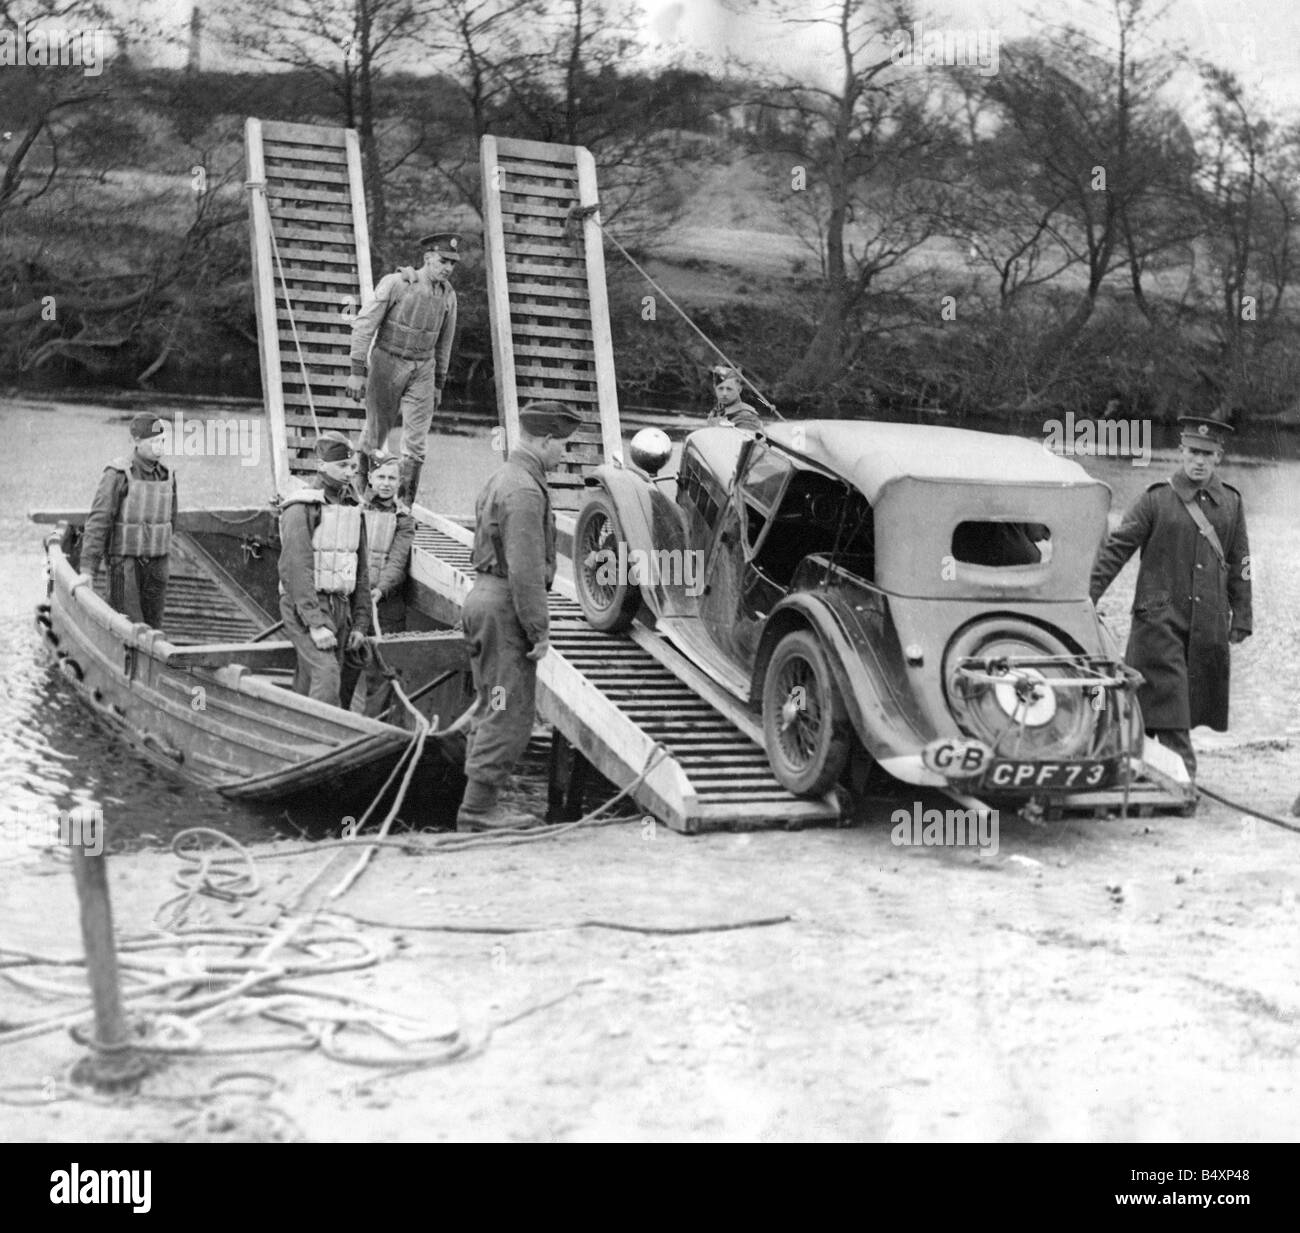 The problem of transporting a car across a river is soon solved by Royal lEngineers with the use of a tracked raft These recruits are demonstrating the military engineering at the Royal lEngineers training centre somewhere in the Northern Command area Stock Photo